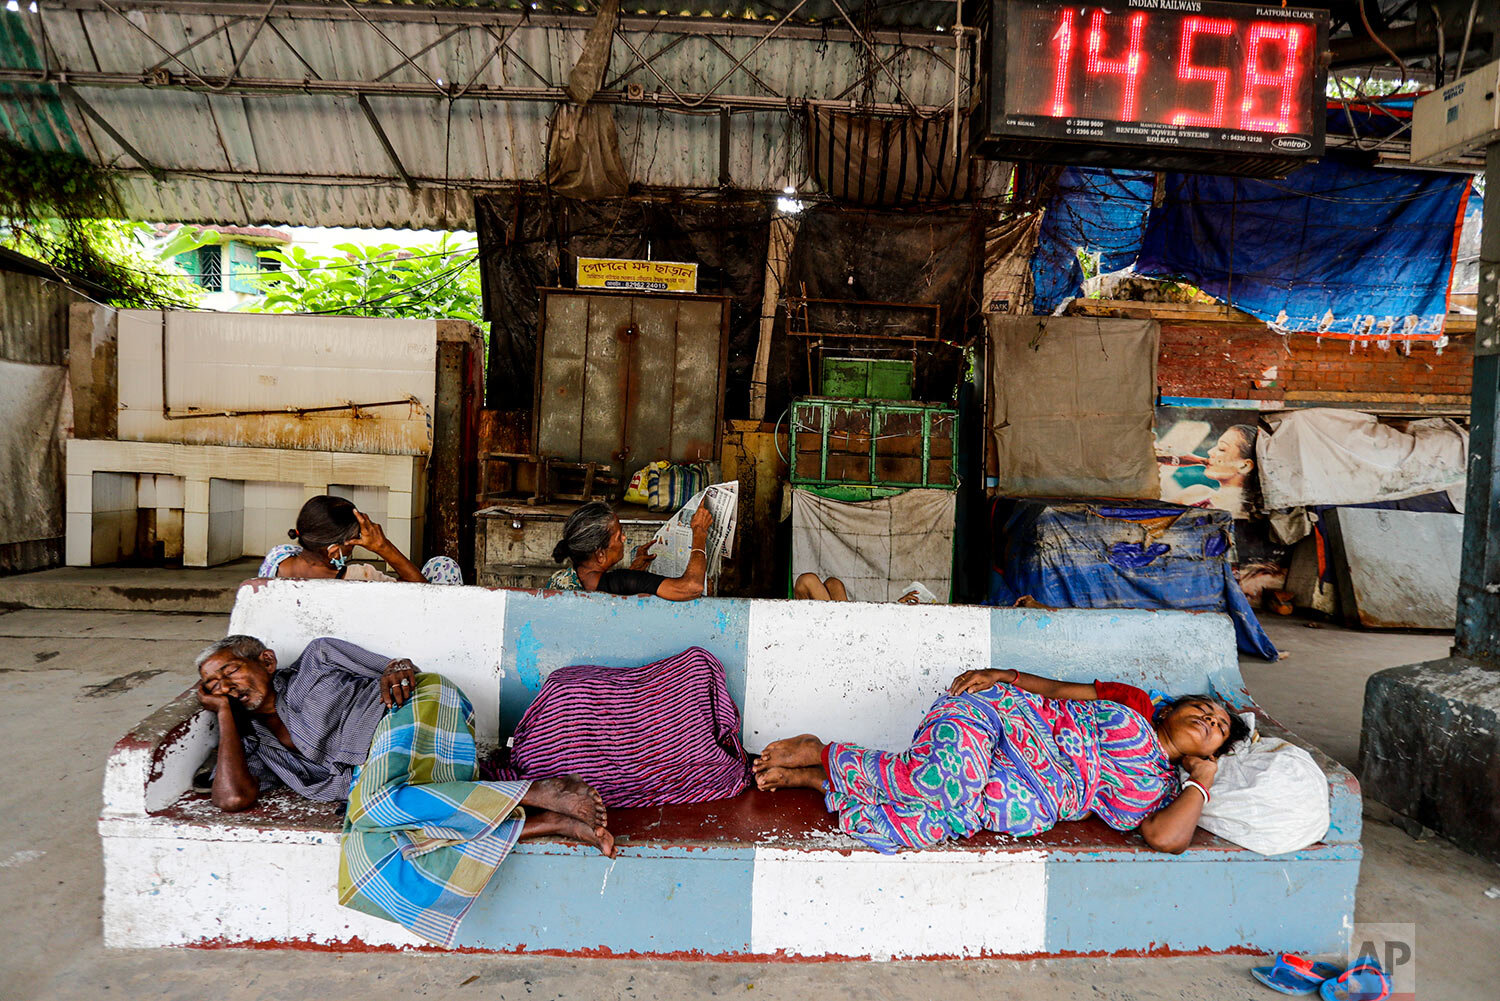  Homeless people sleep in a local railway station after local trains were suspended due to the coronavirus pandemic in Kolkata, India, Saturday, Oct. 10, 2020.  (AP Photo/Bikas Das) 